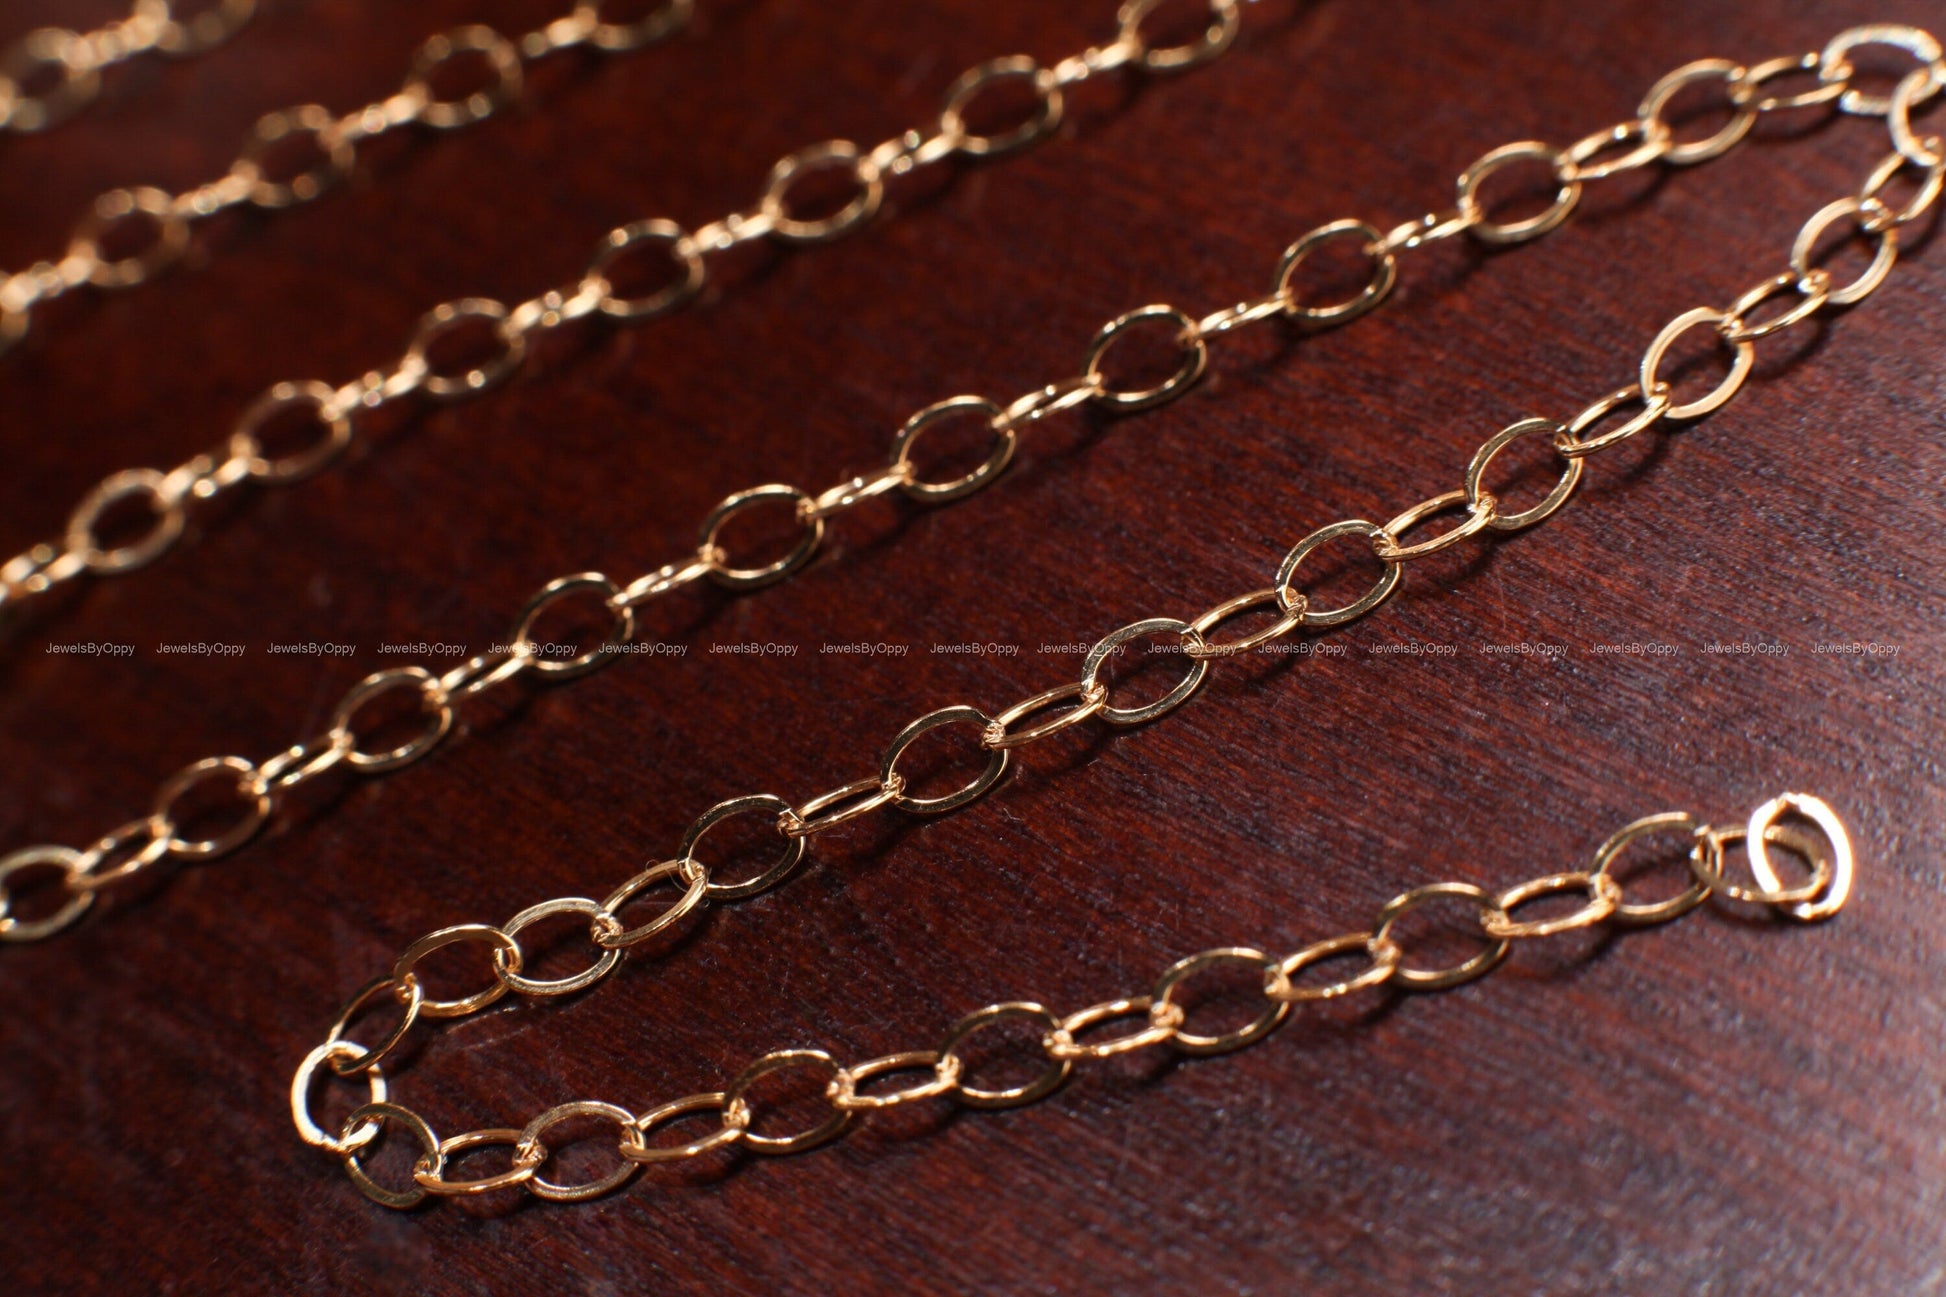 14K Gold Filled Cable Chain, 3x2mm Flat Oval Cable Chain, Jewelry Making Unfinished Italian Chain